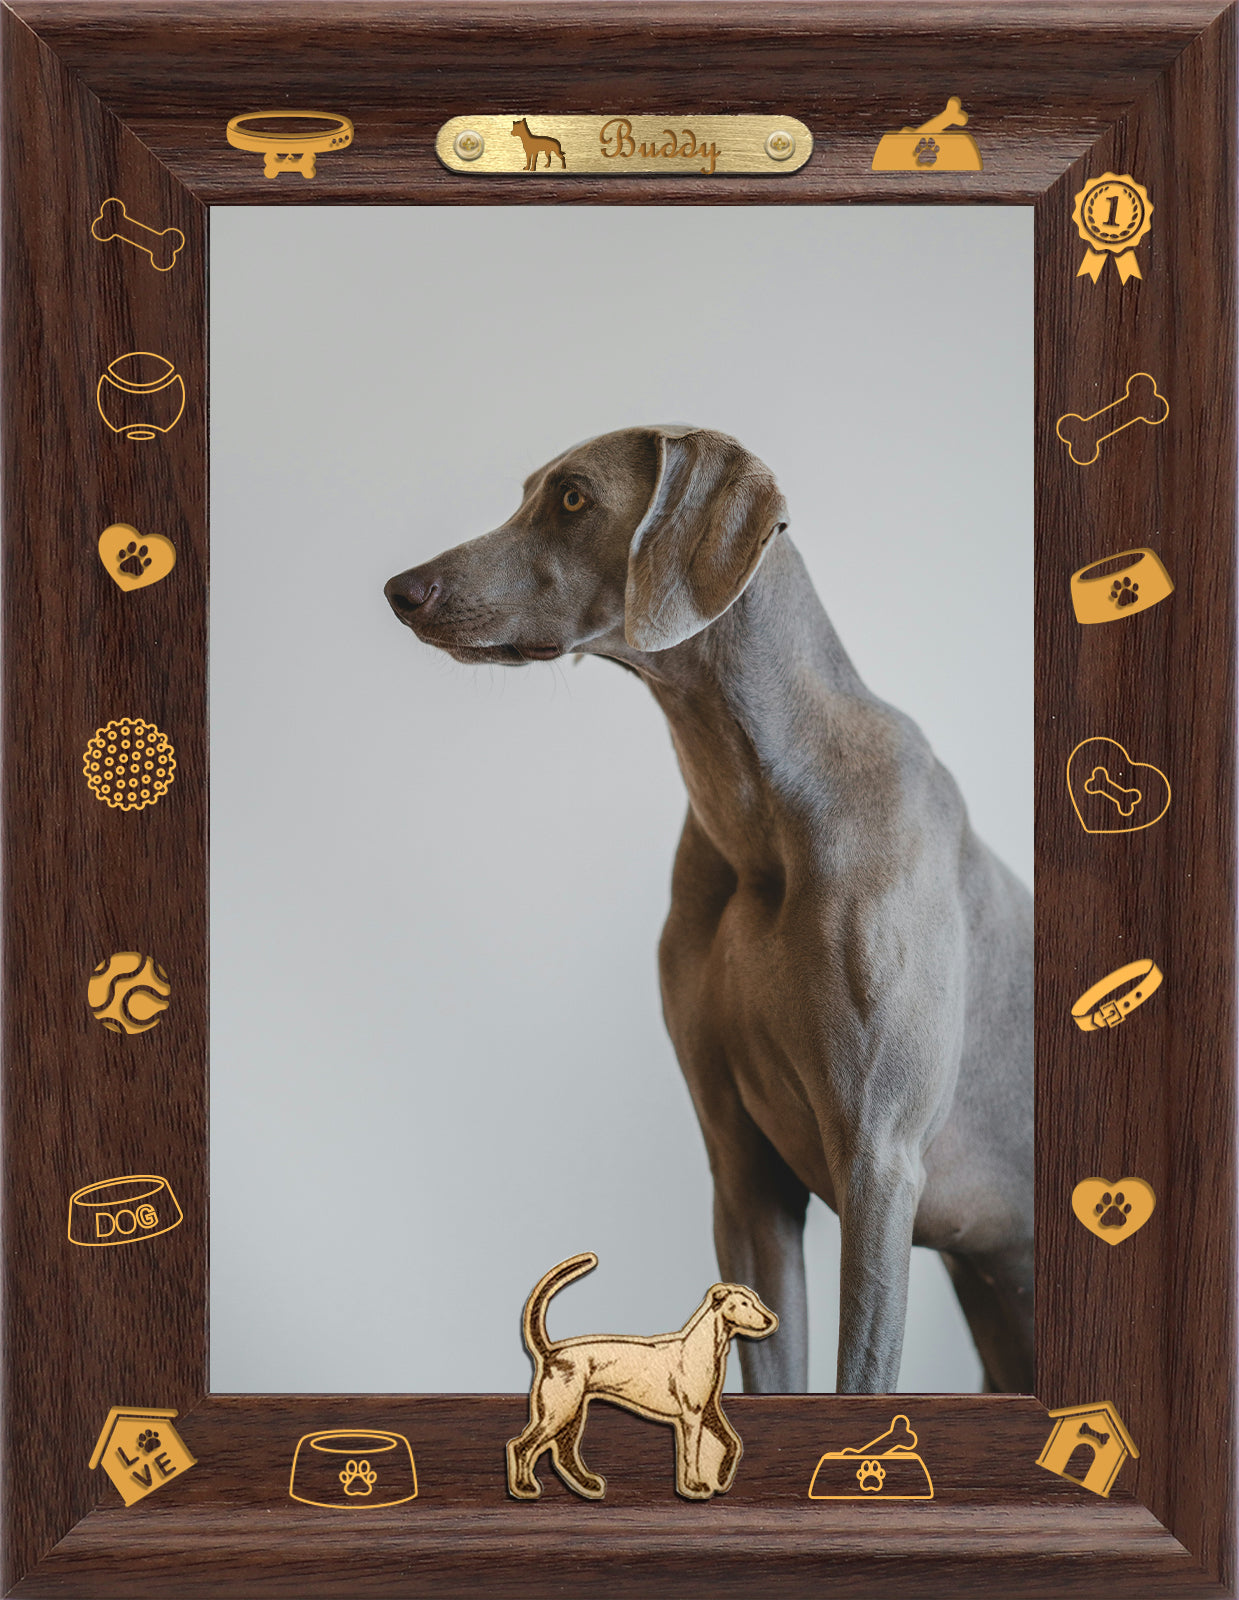 Photo Frame Decoration Dotride Custom Picture Frame, Wood Photo Frame with Custom Wooden Carving, Can be engraved with any text you want, suitable for Suitable for Various Themes, Golden Retriever